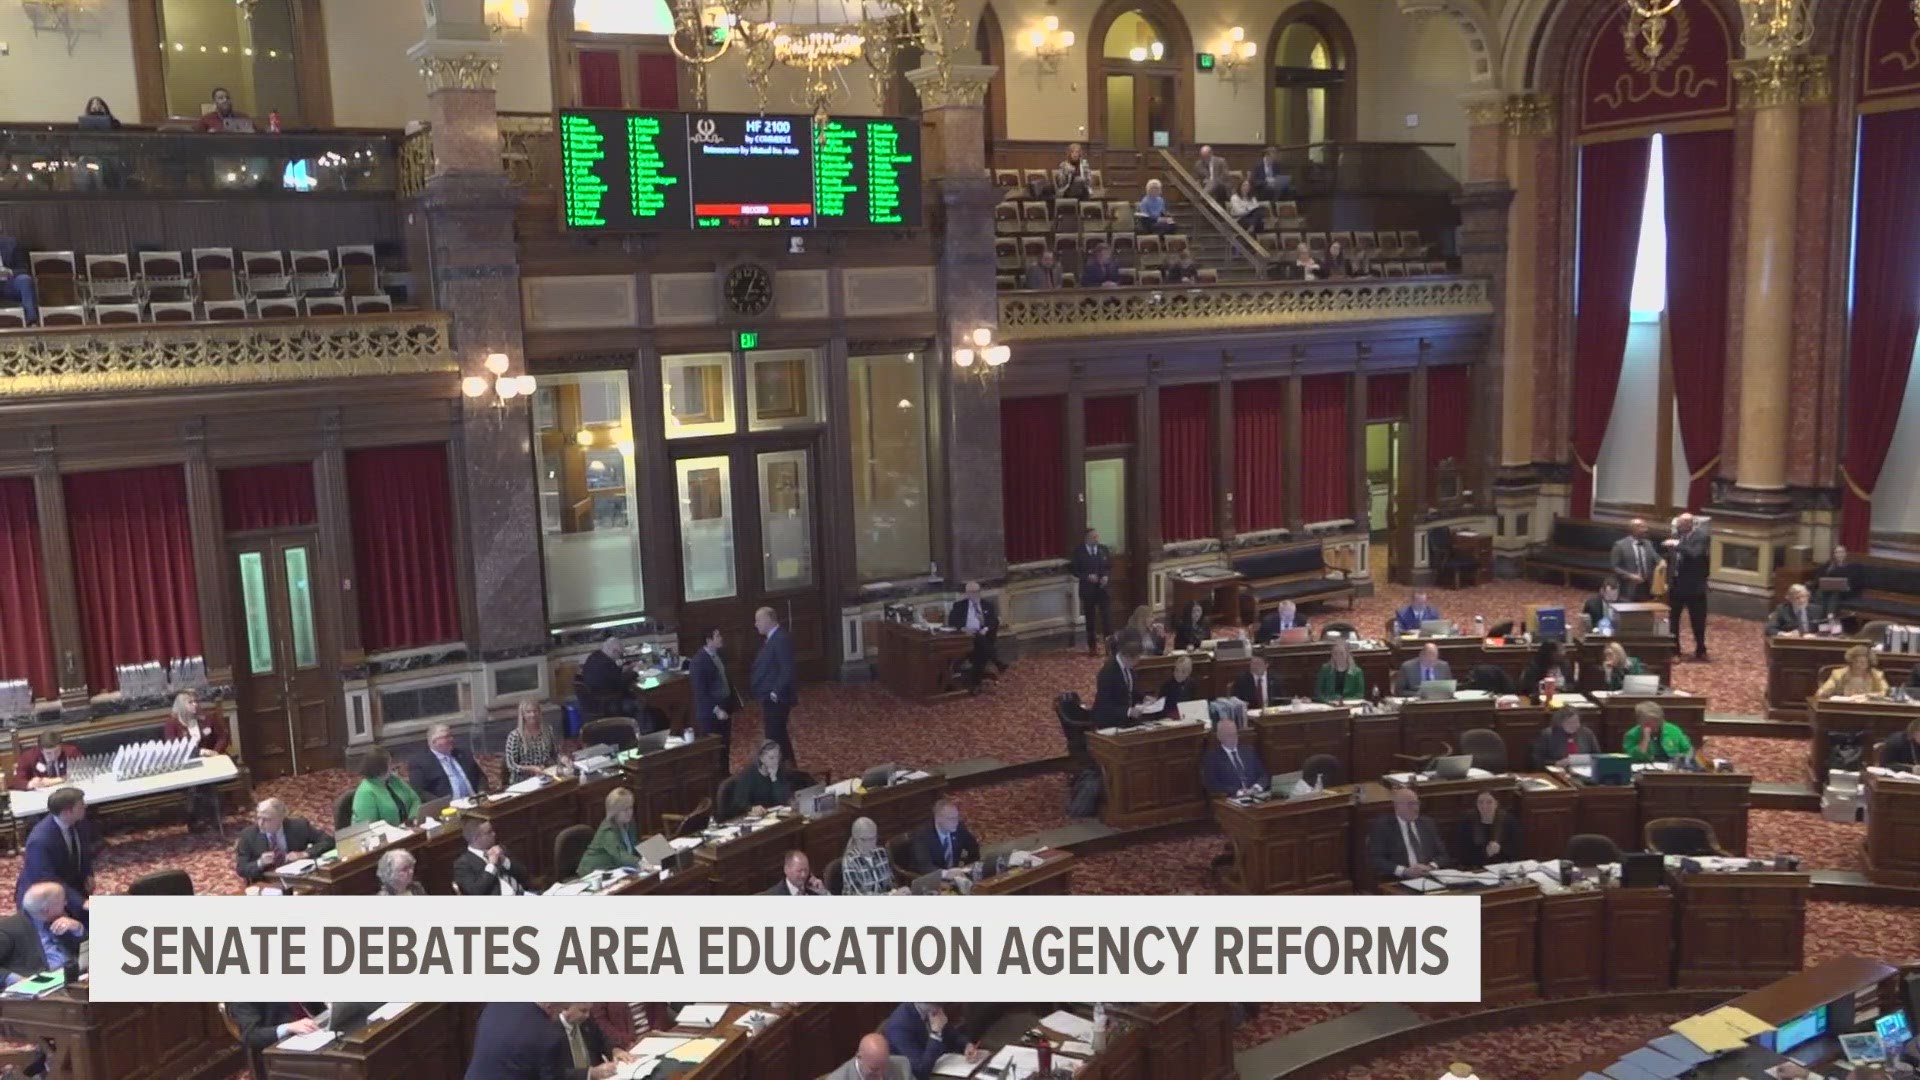 In a vote of 28 to 22, the Senate has passed major reforms to Area Education Agencies in Iowa, sending the bill back to the House.